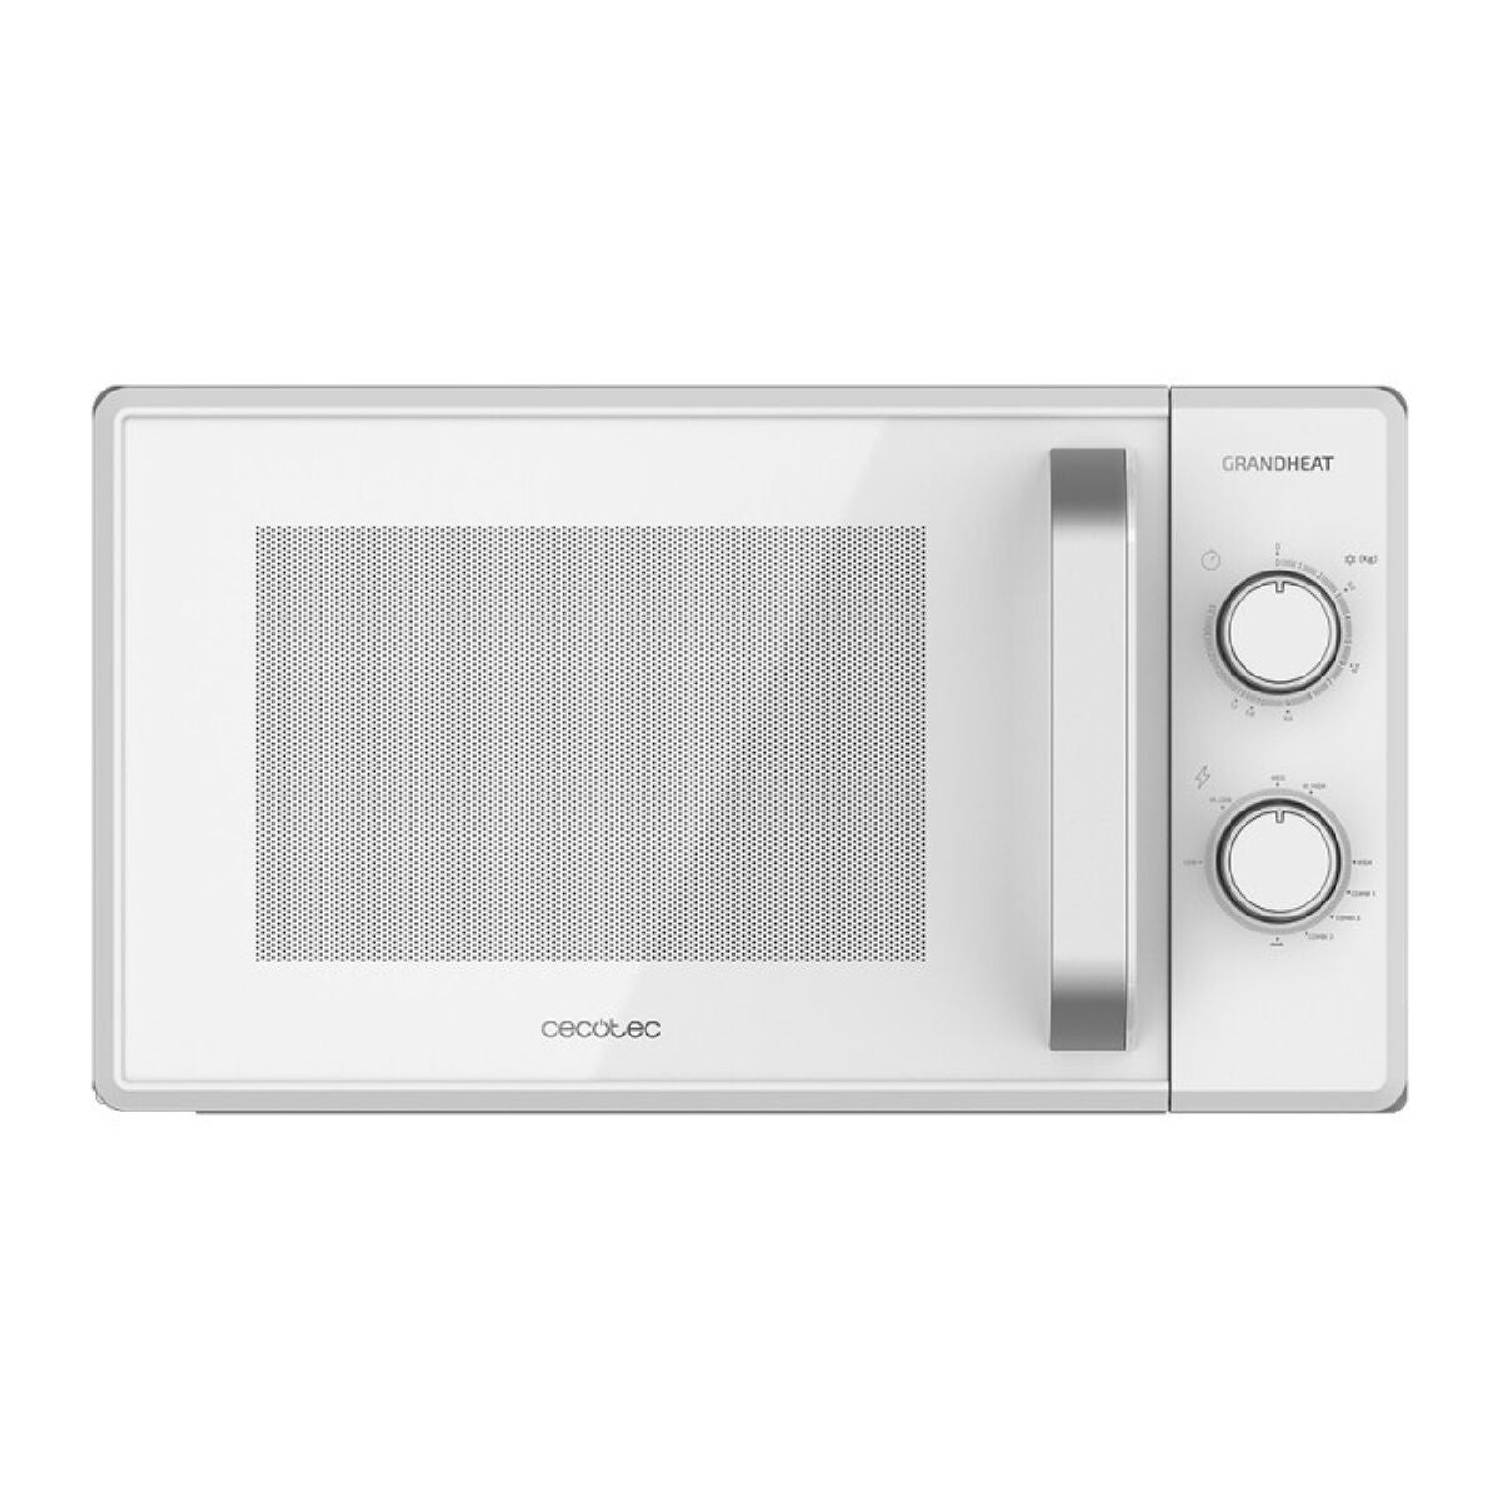 Microwave with Grill Cecotec Grandheat 3120